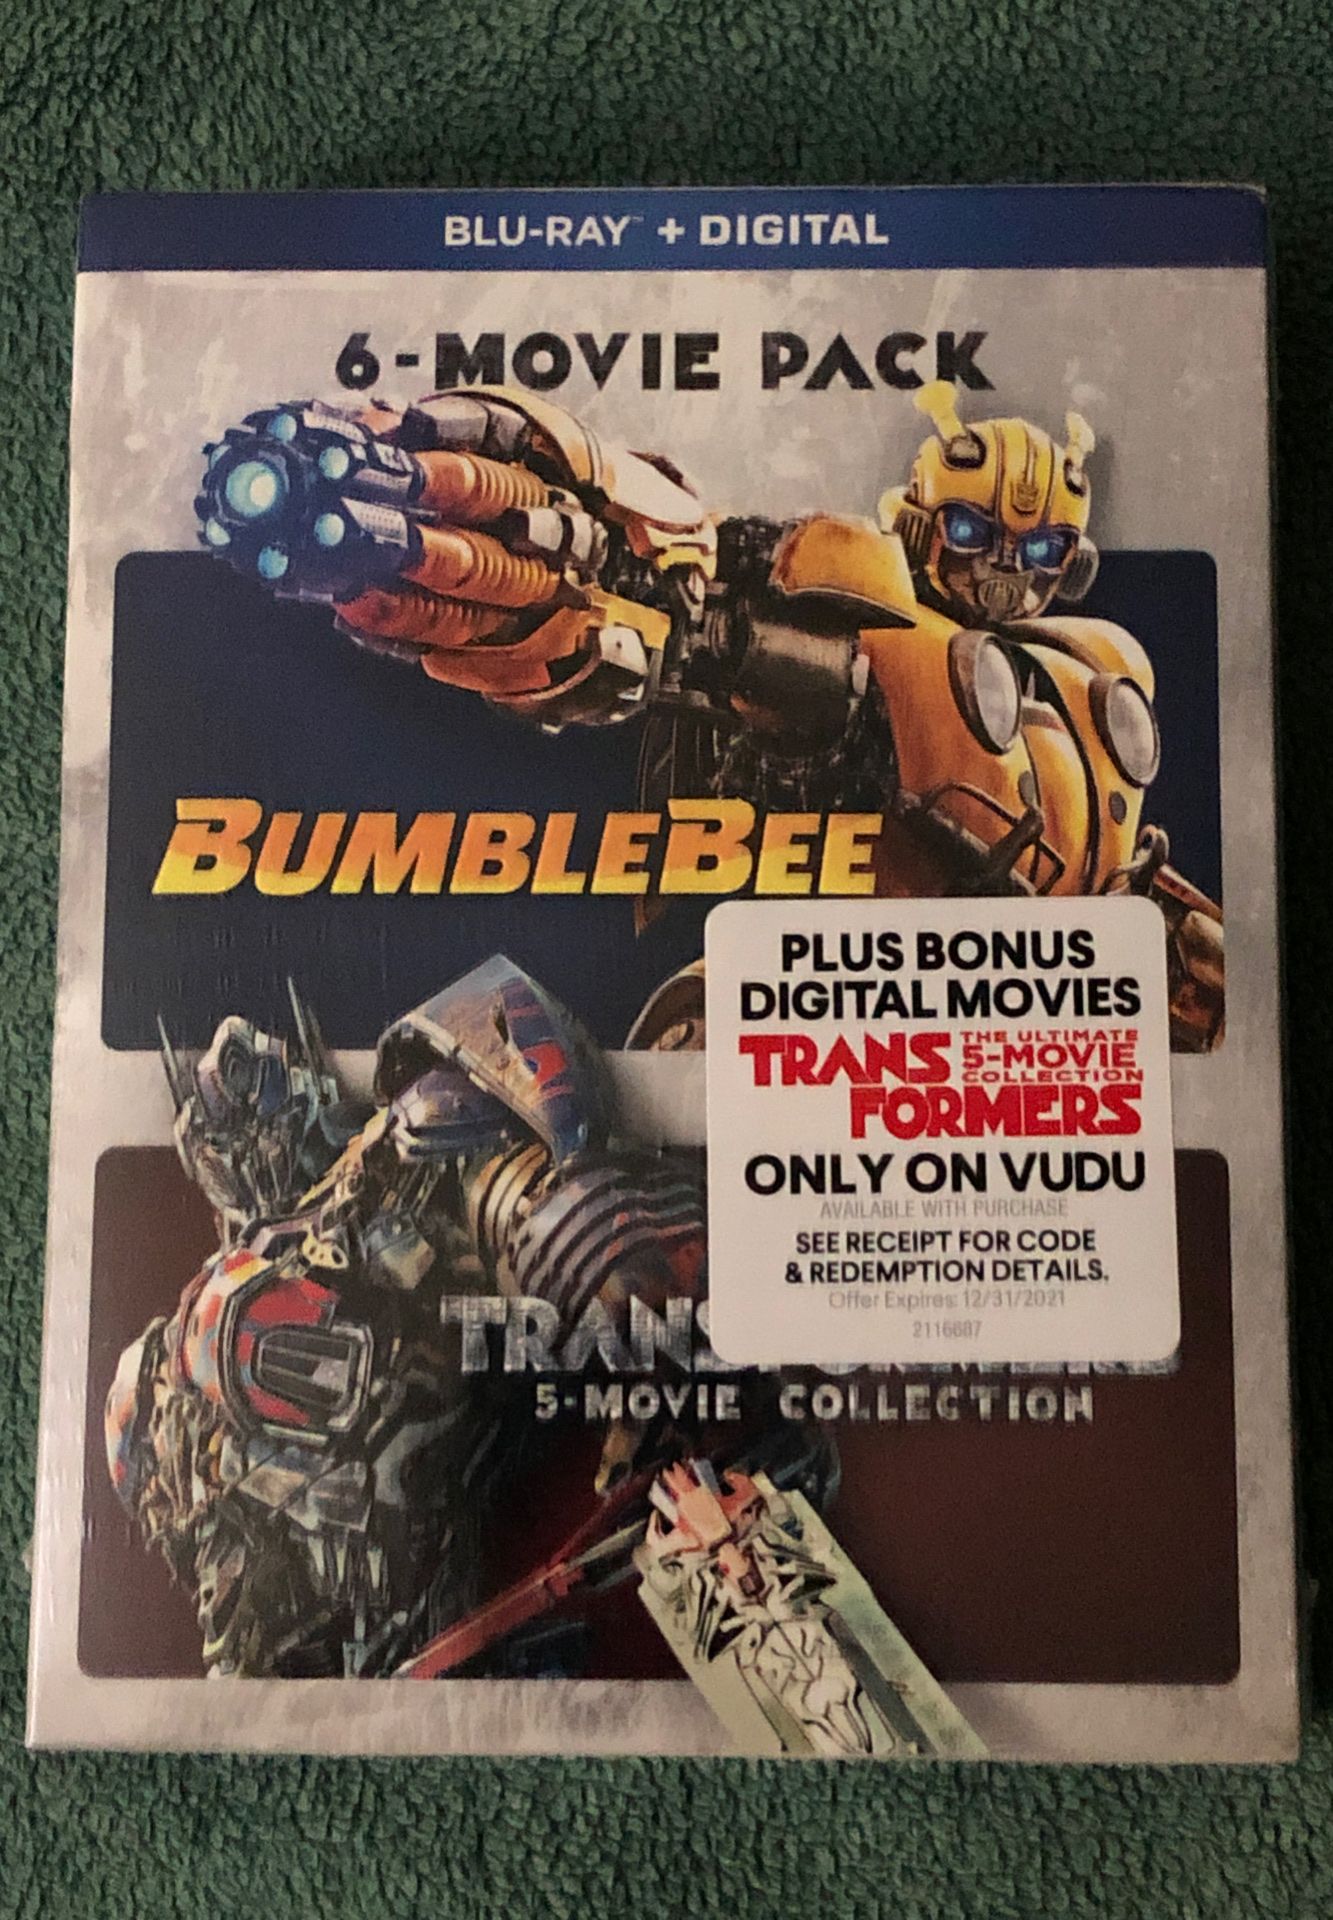 6-MOVIE PACK (TRANSFORMERS 5-MOVIE COLLECTION + BUMBLEBEE) BLU-RAY SEALED